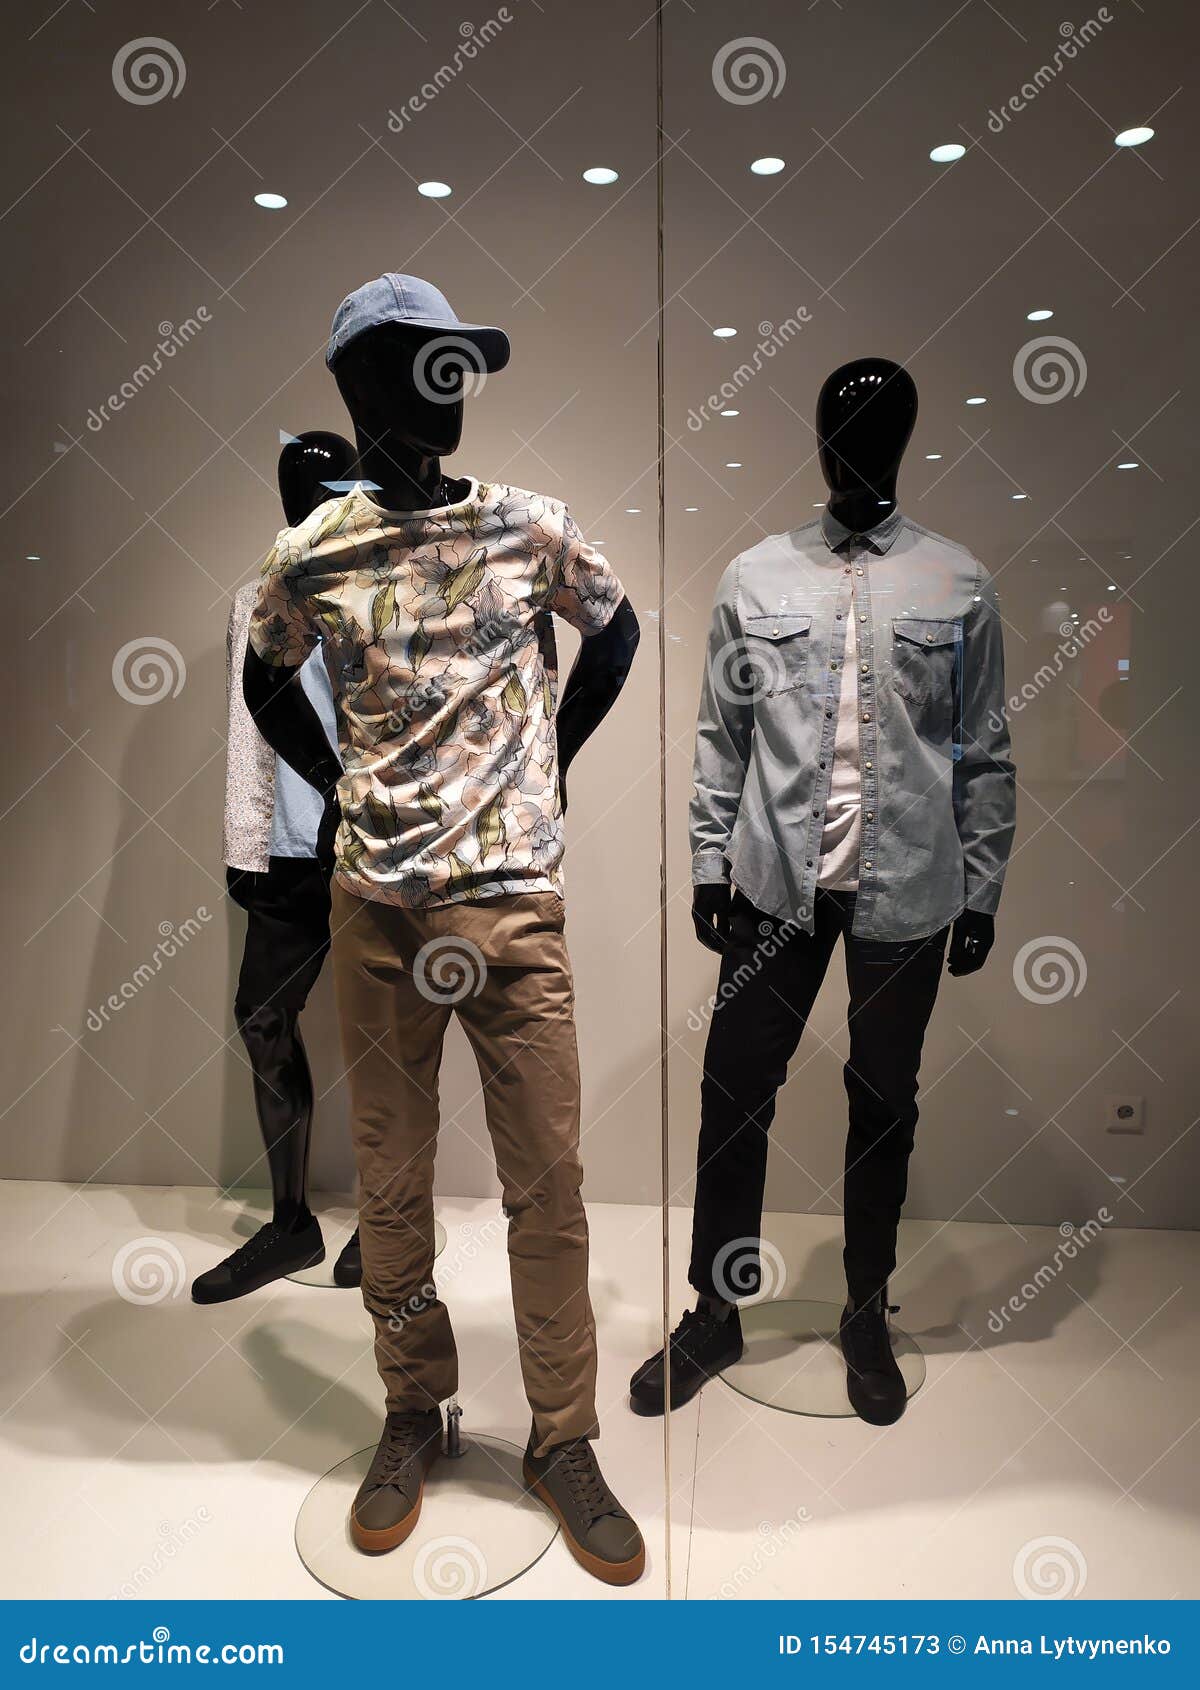 Mens Mannequins on Store Stand Stock Image - Image of clothing ...